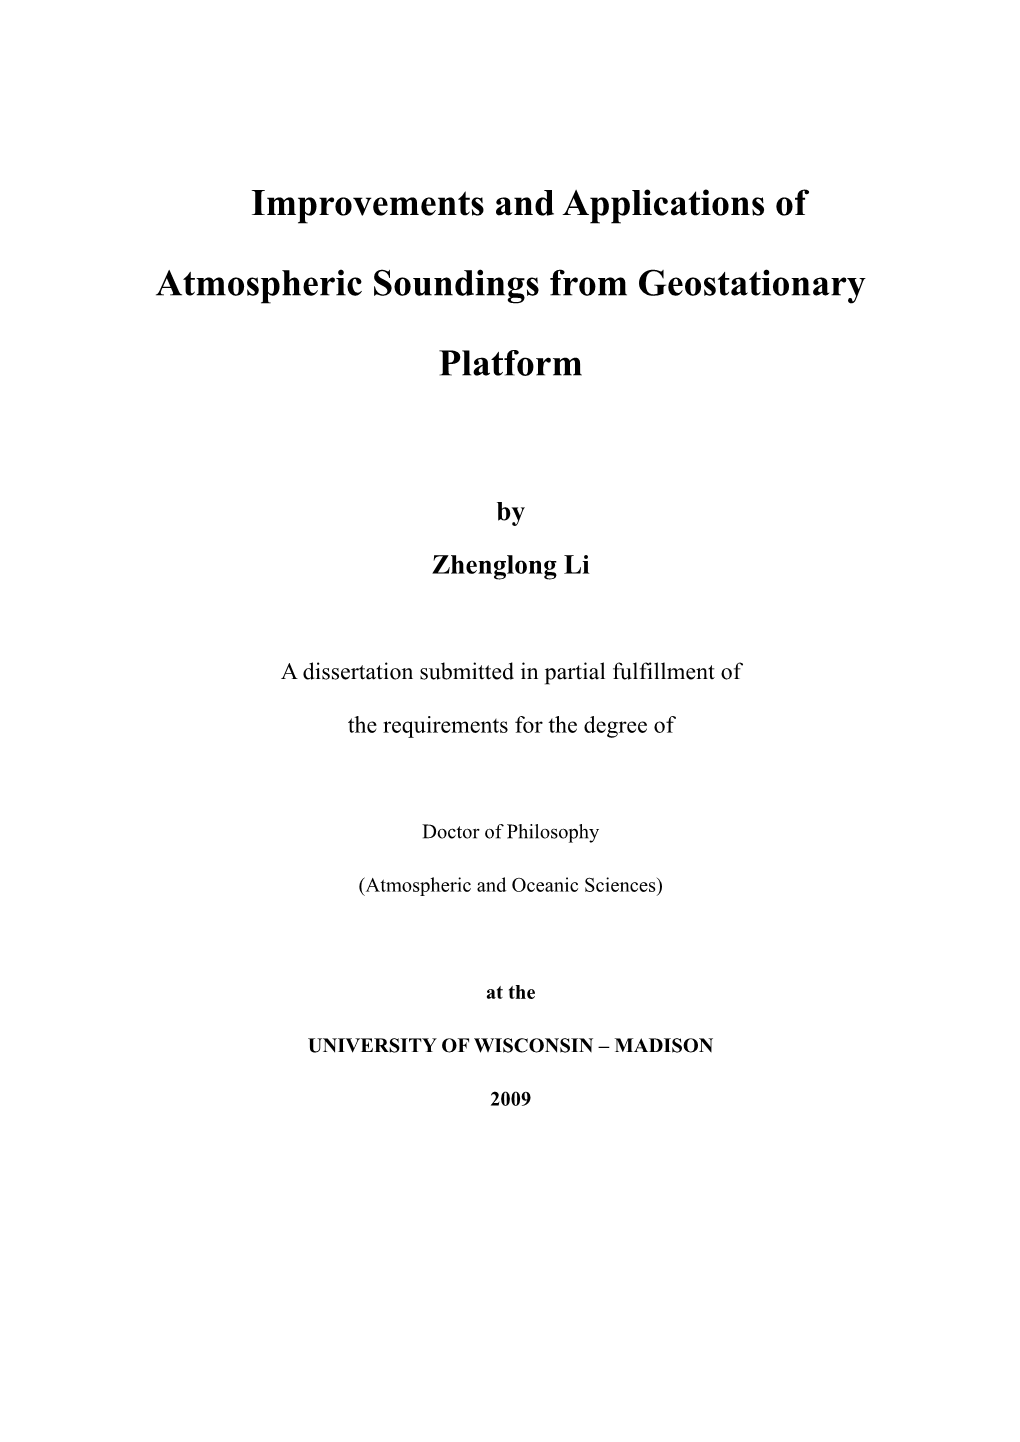 Improvements and Applications of Atmospheric Soundings from Geostationary Platform